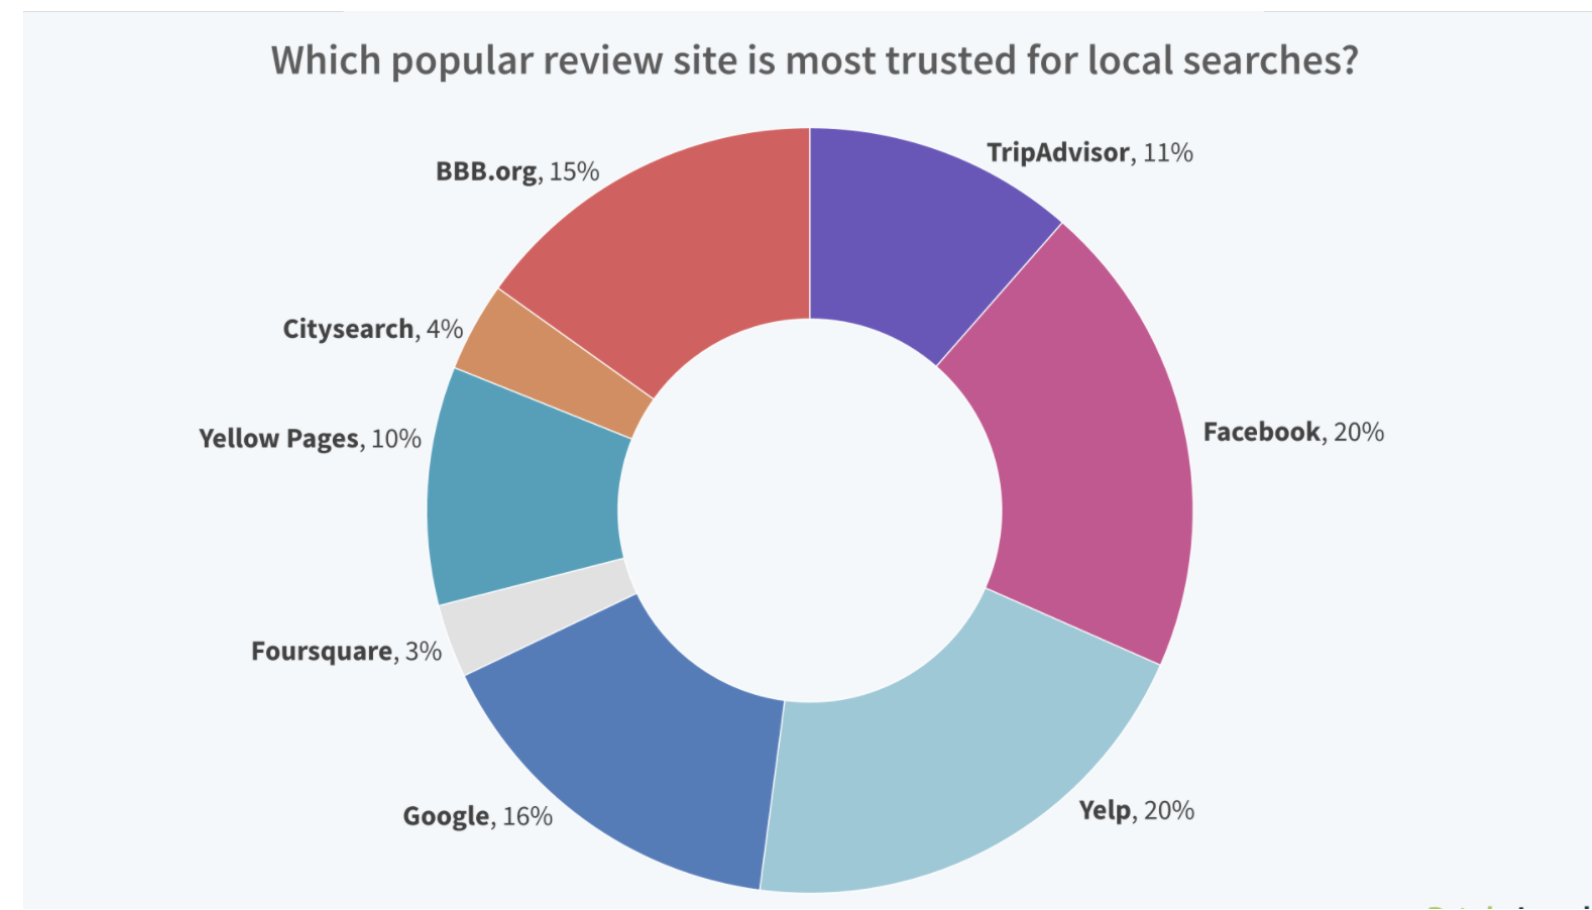 image showing which review site is the most trusted for local searches